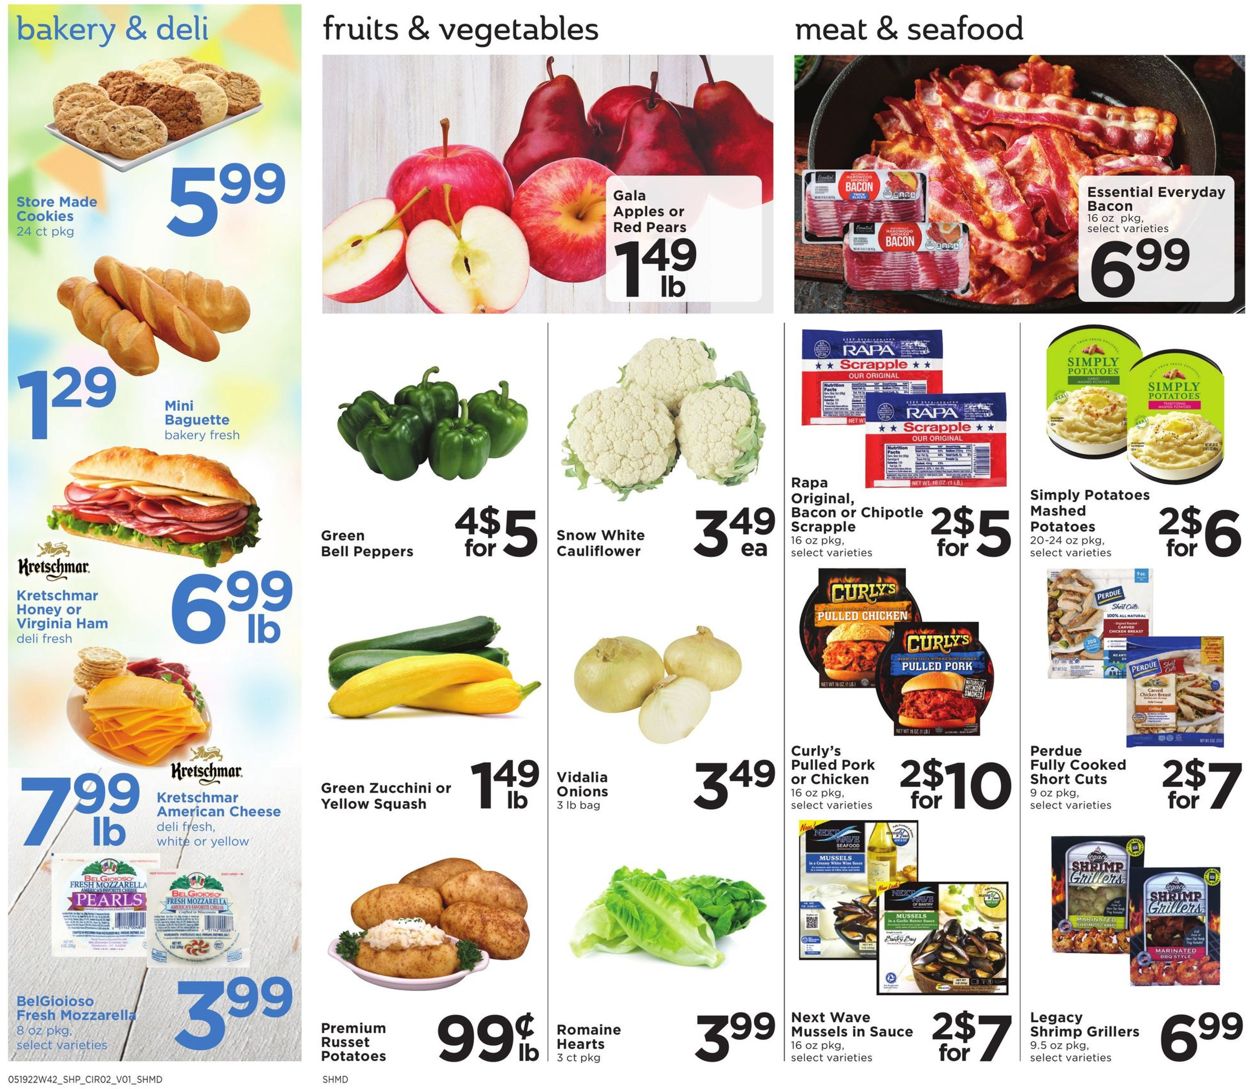 Shoppers Food & Pharmacy Ad from 05/19/2022